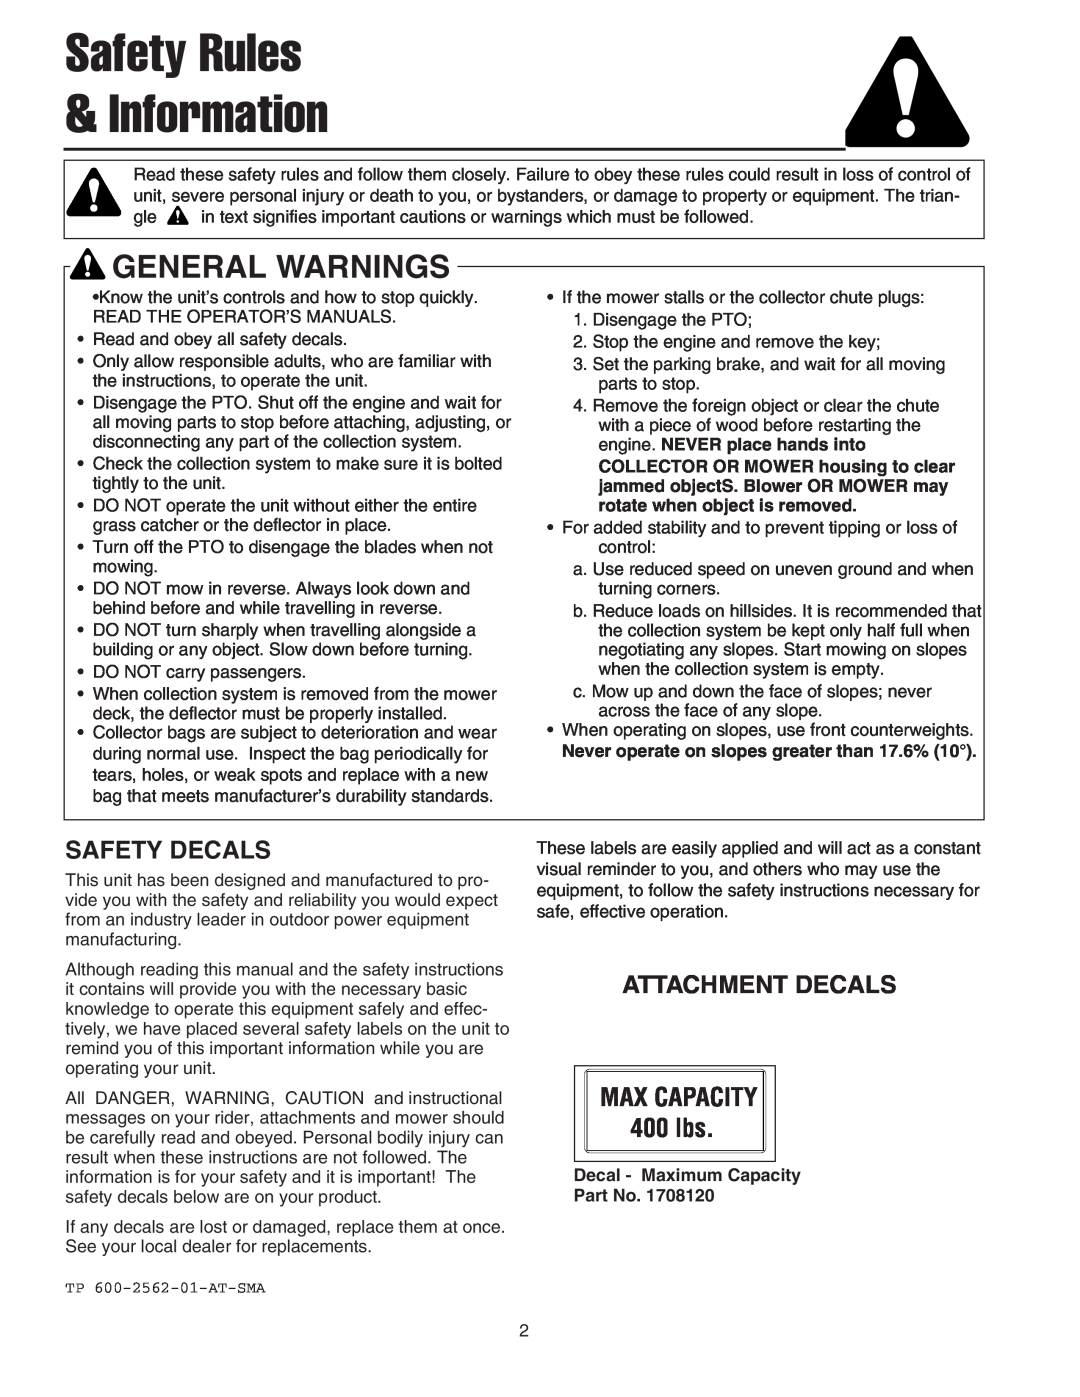 Snapper 1726564, 1694542 manual Safety Rules Information, Safety Decals, Attachment Decals, General Warnings 